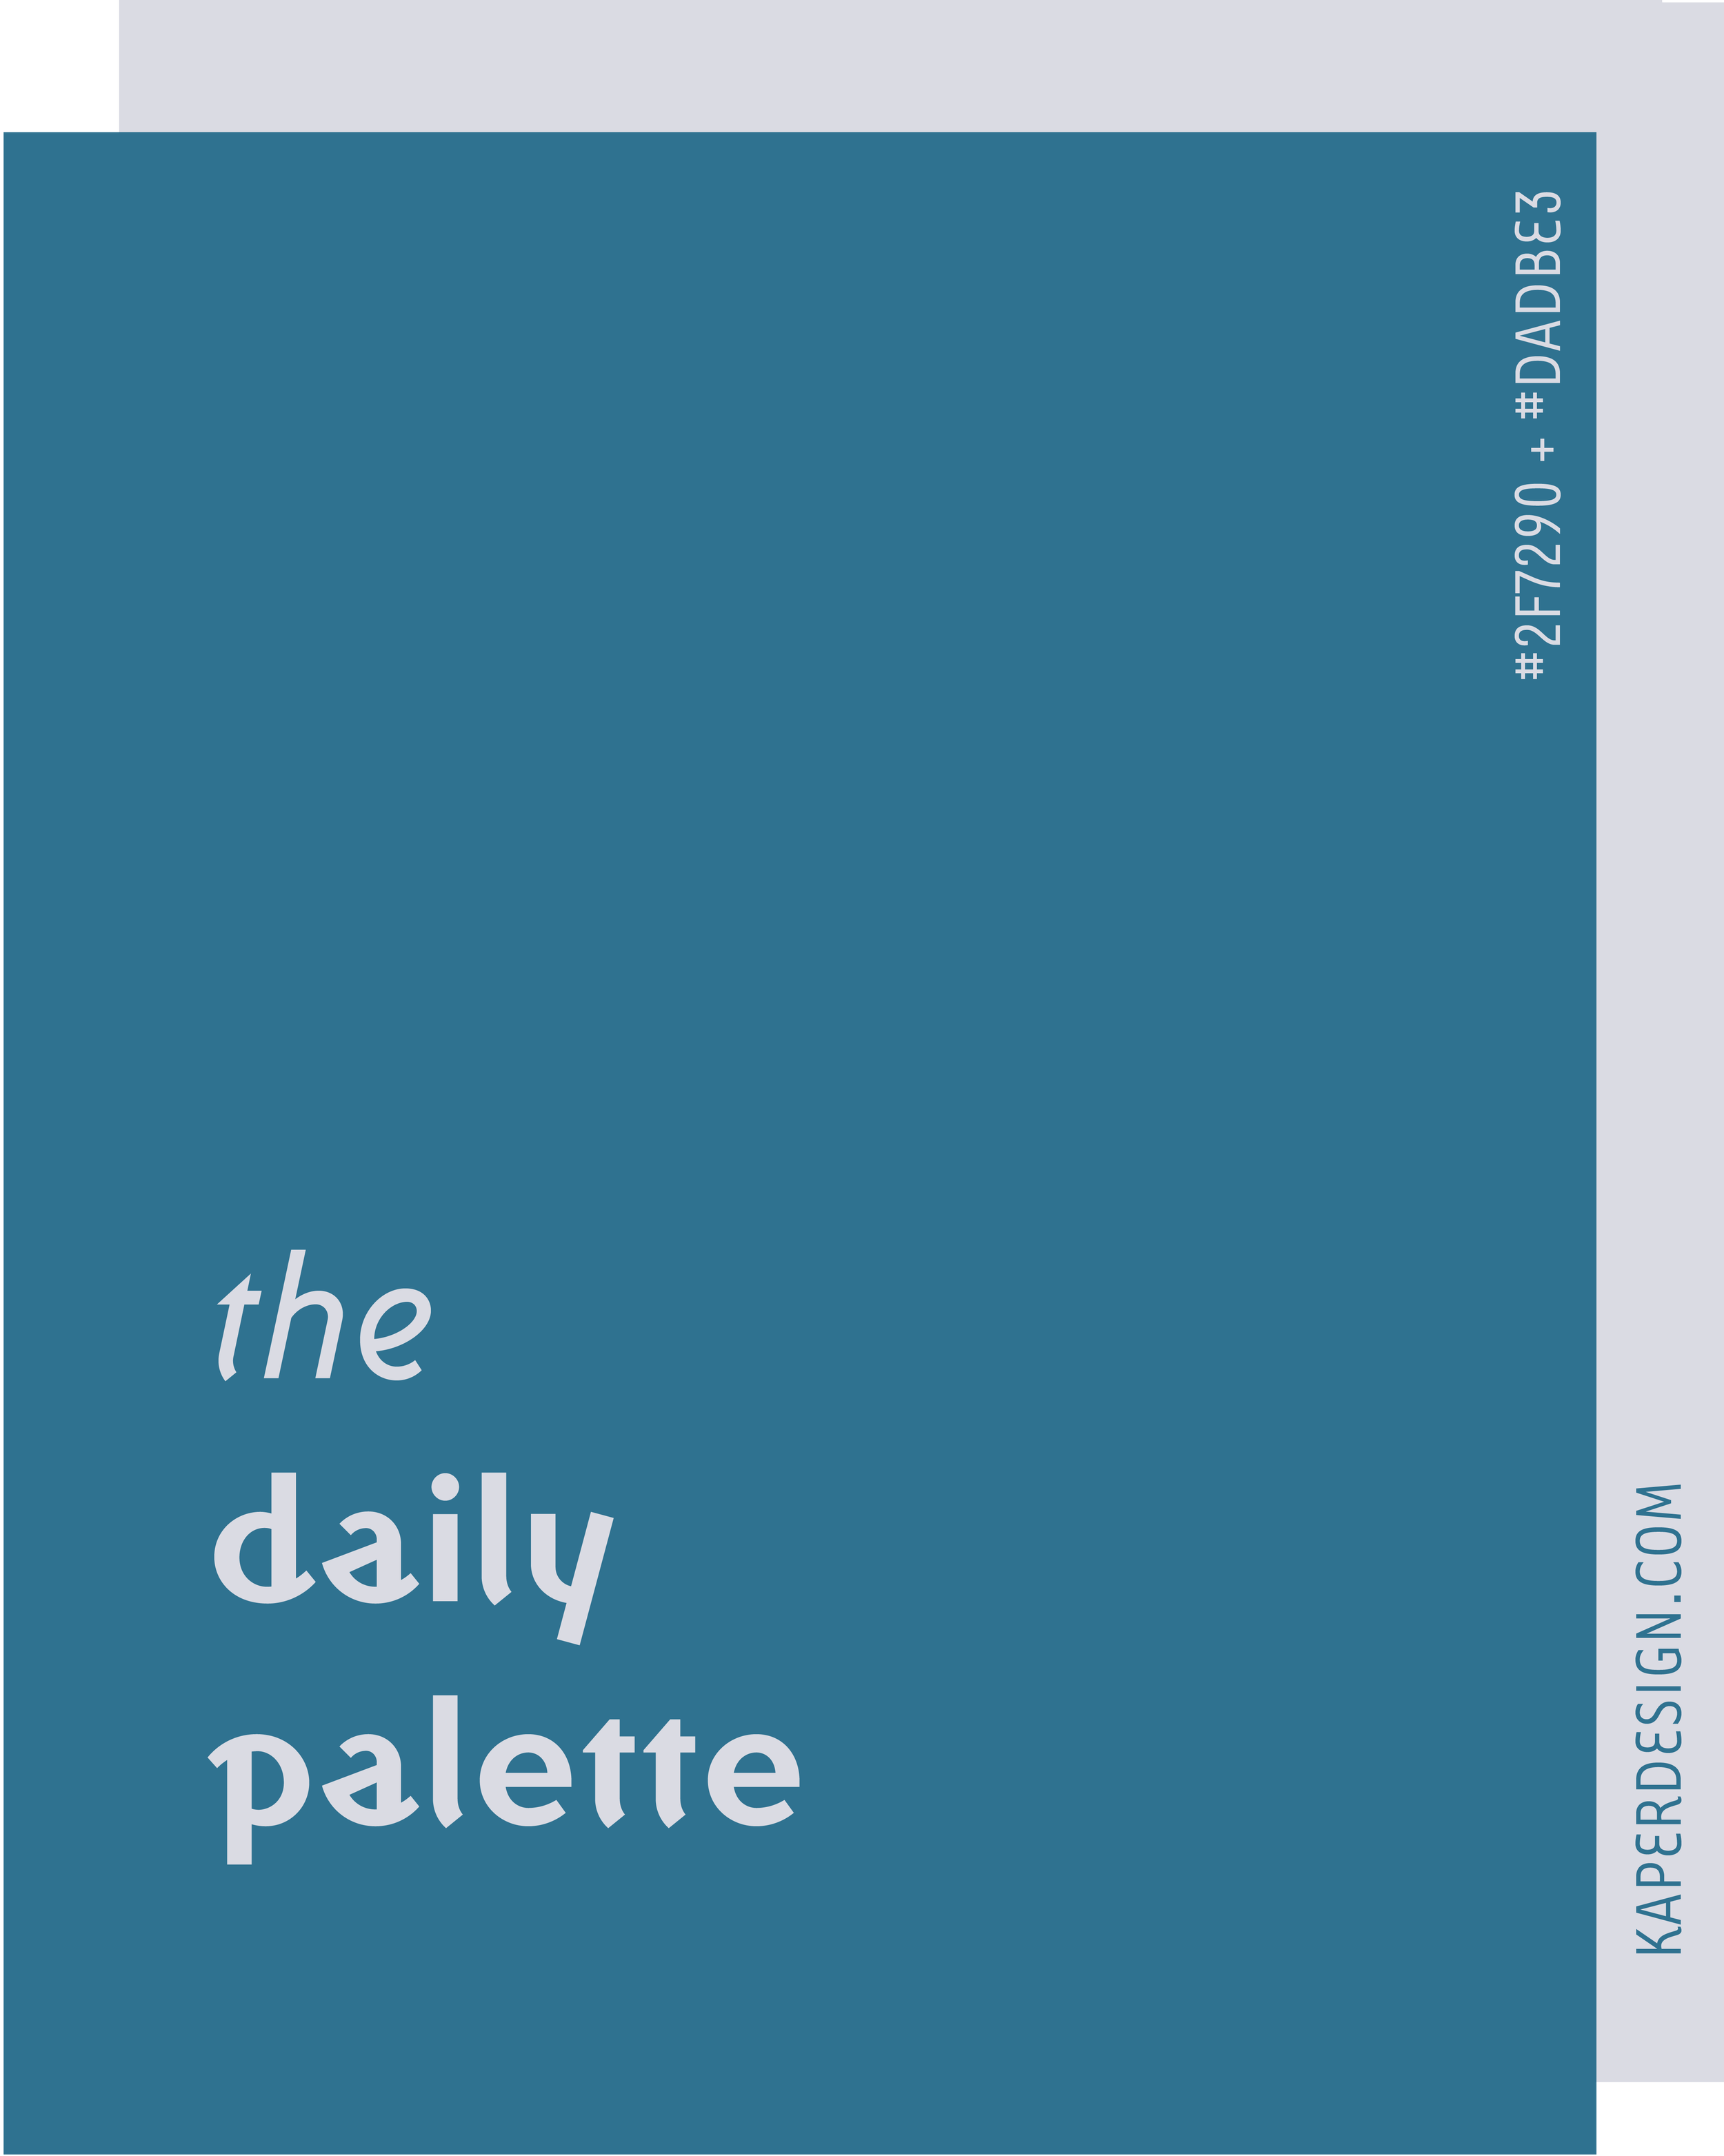 Kaper Design_the Daily Palette Project-06.png